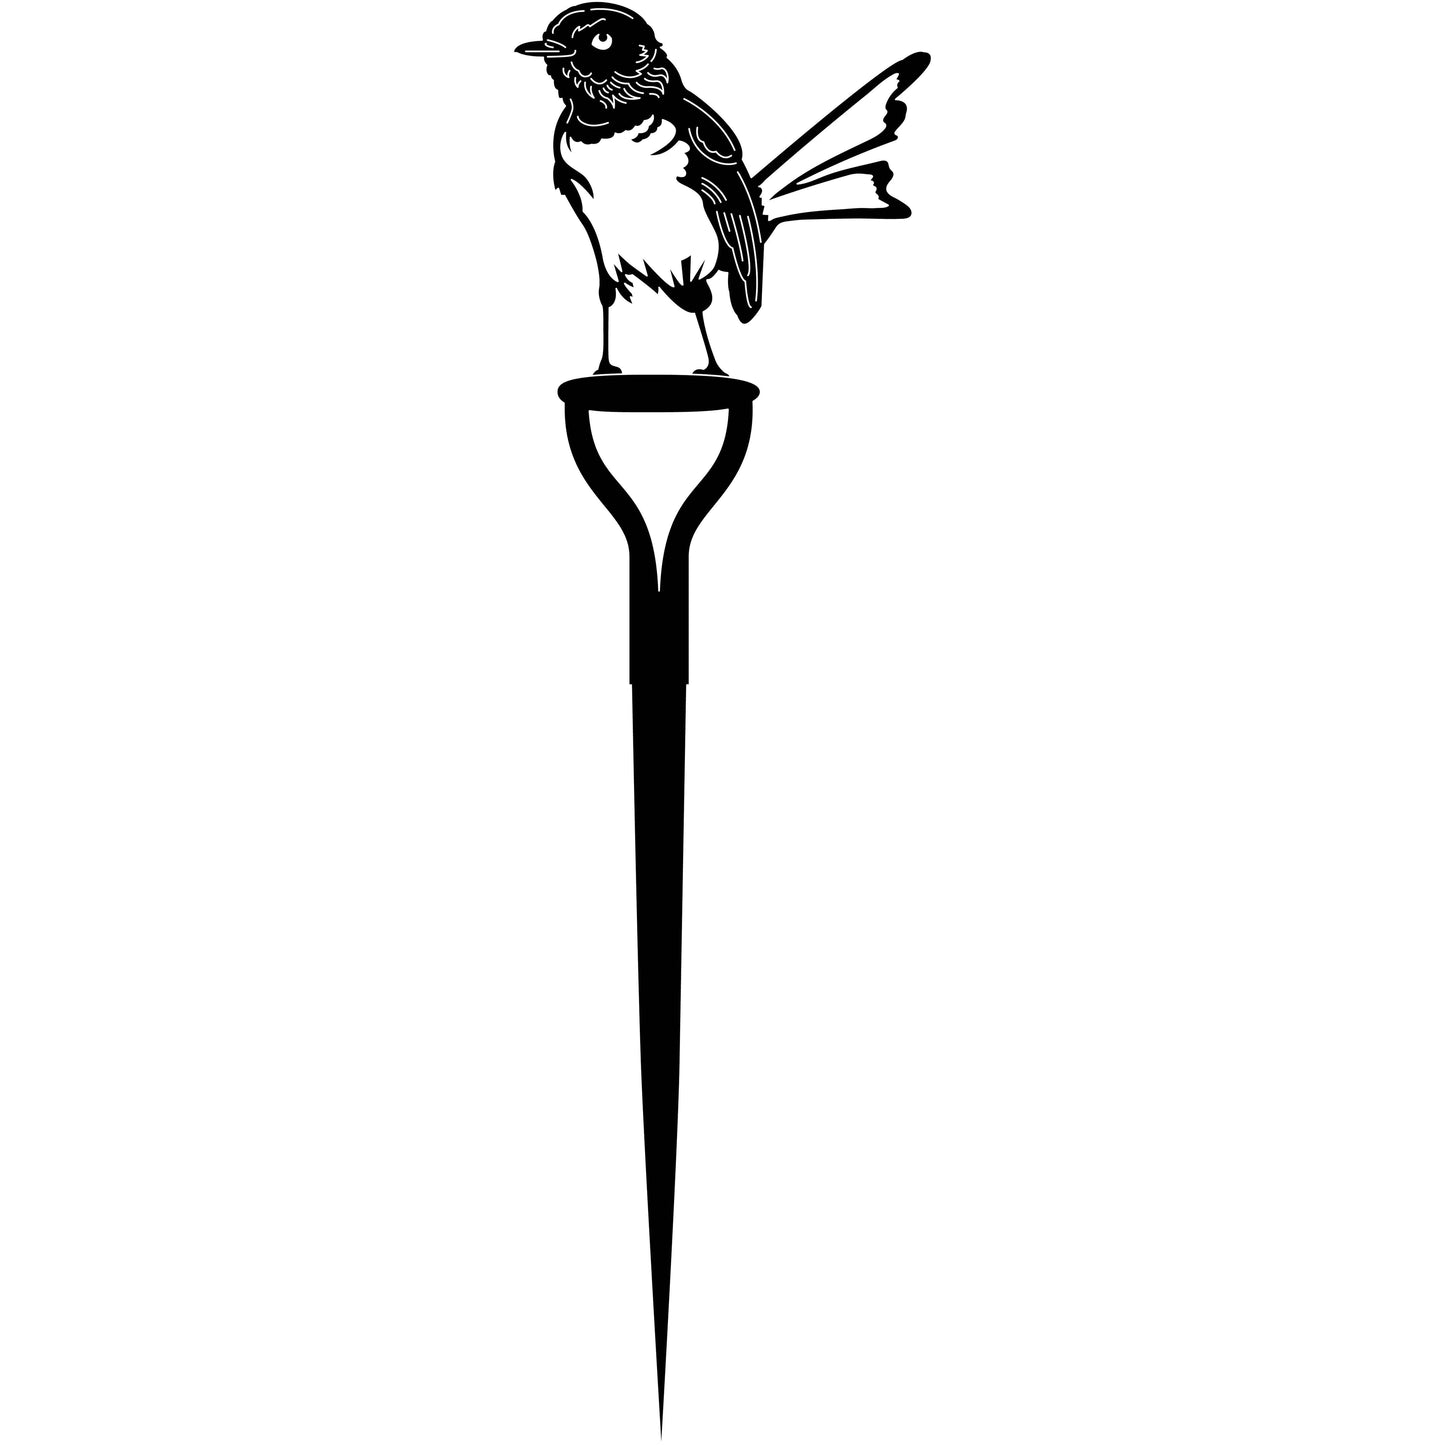 Willy Wagtail Bird View on a Shovel Handle-DXF files Cut Ready for CNC-DXFforCNC.com